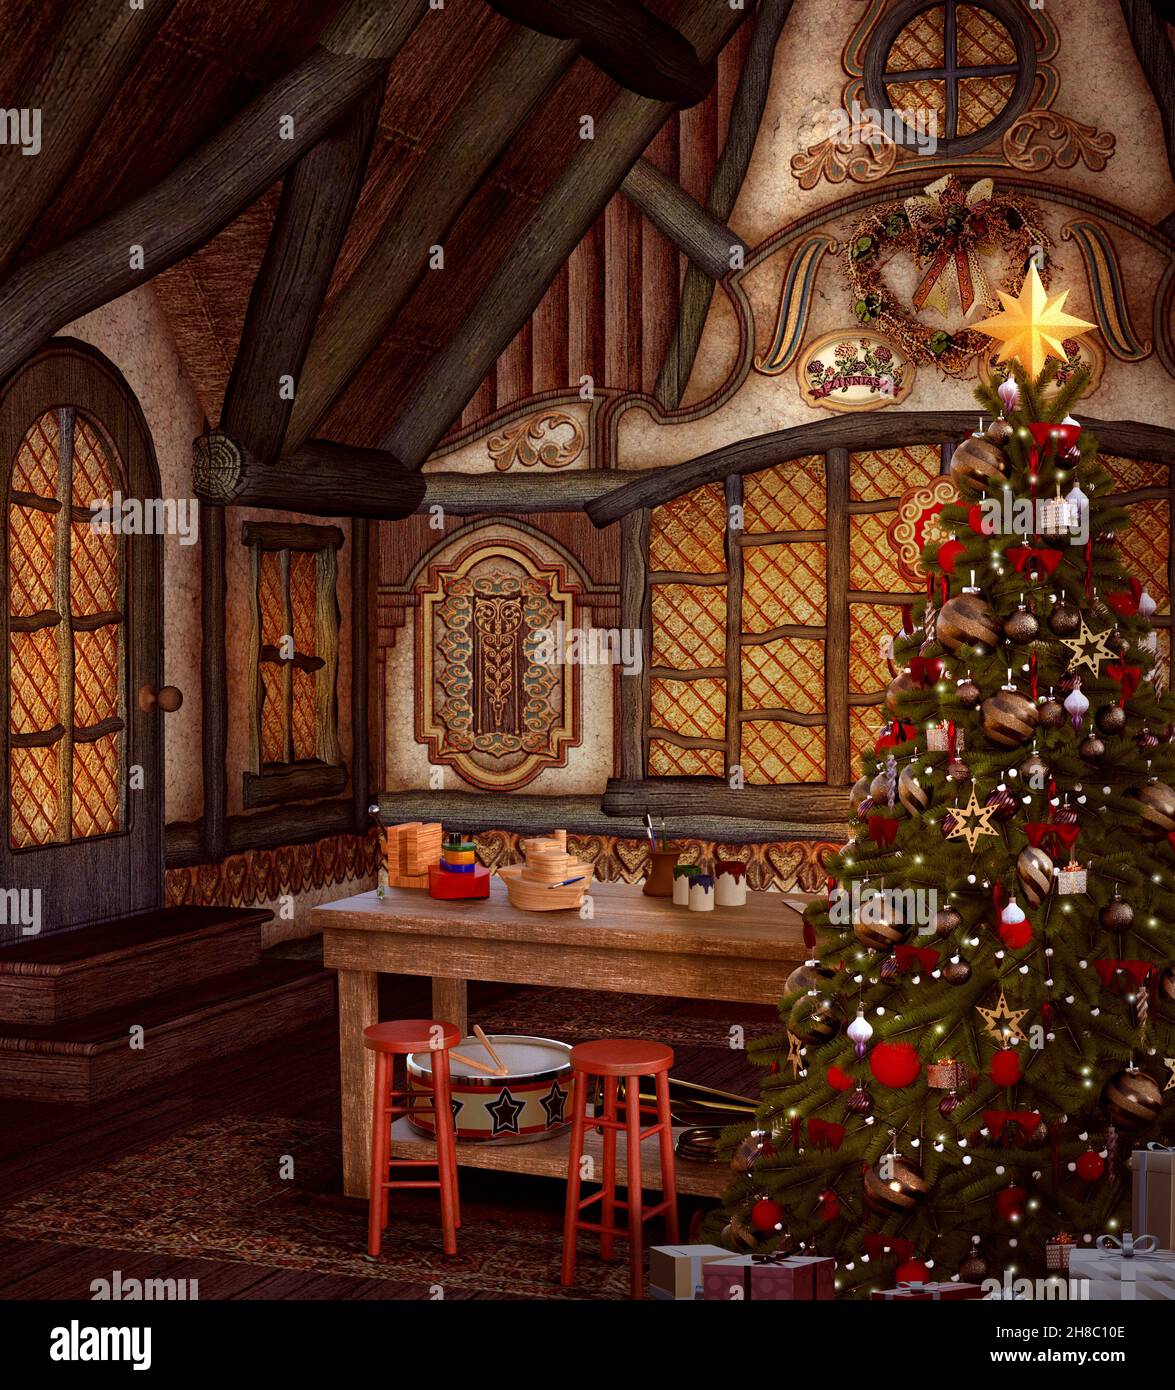 Old cottage interior with Santa working desk full of gift boxes and a beautiful Christmas tree with red baubles Stock Photo